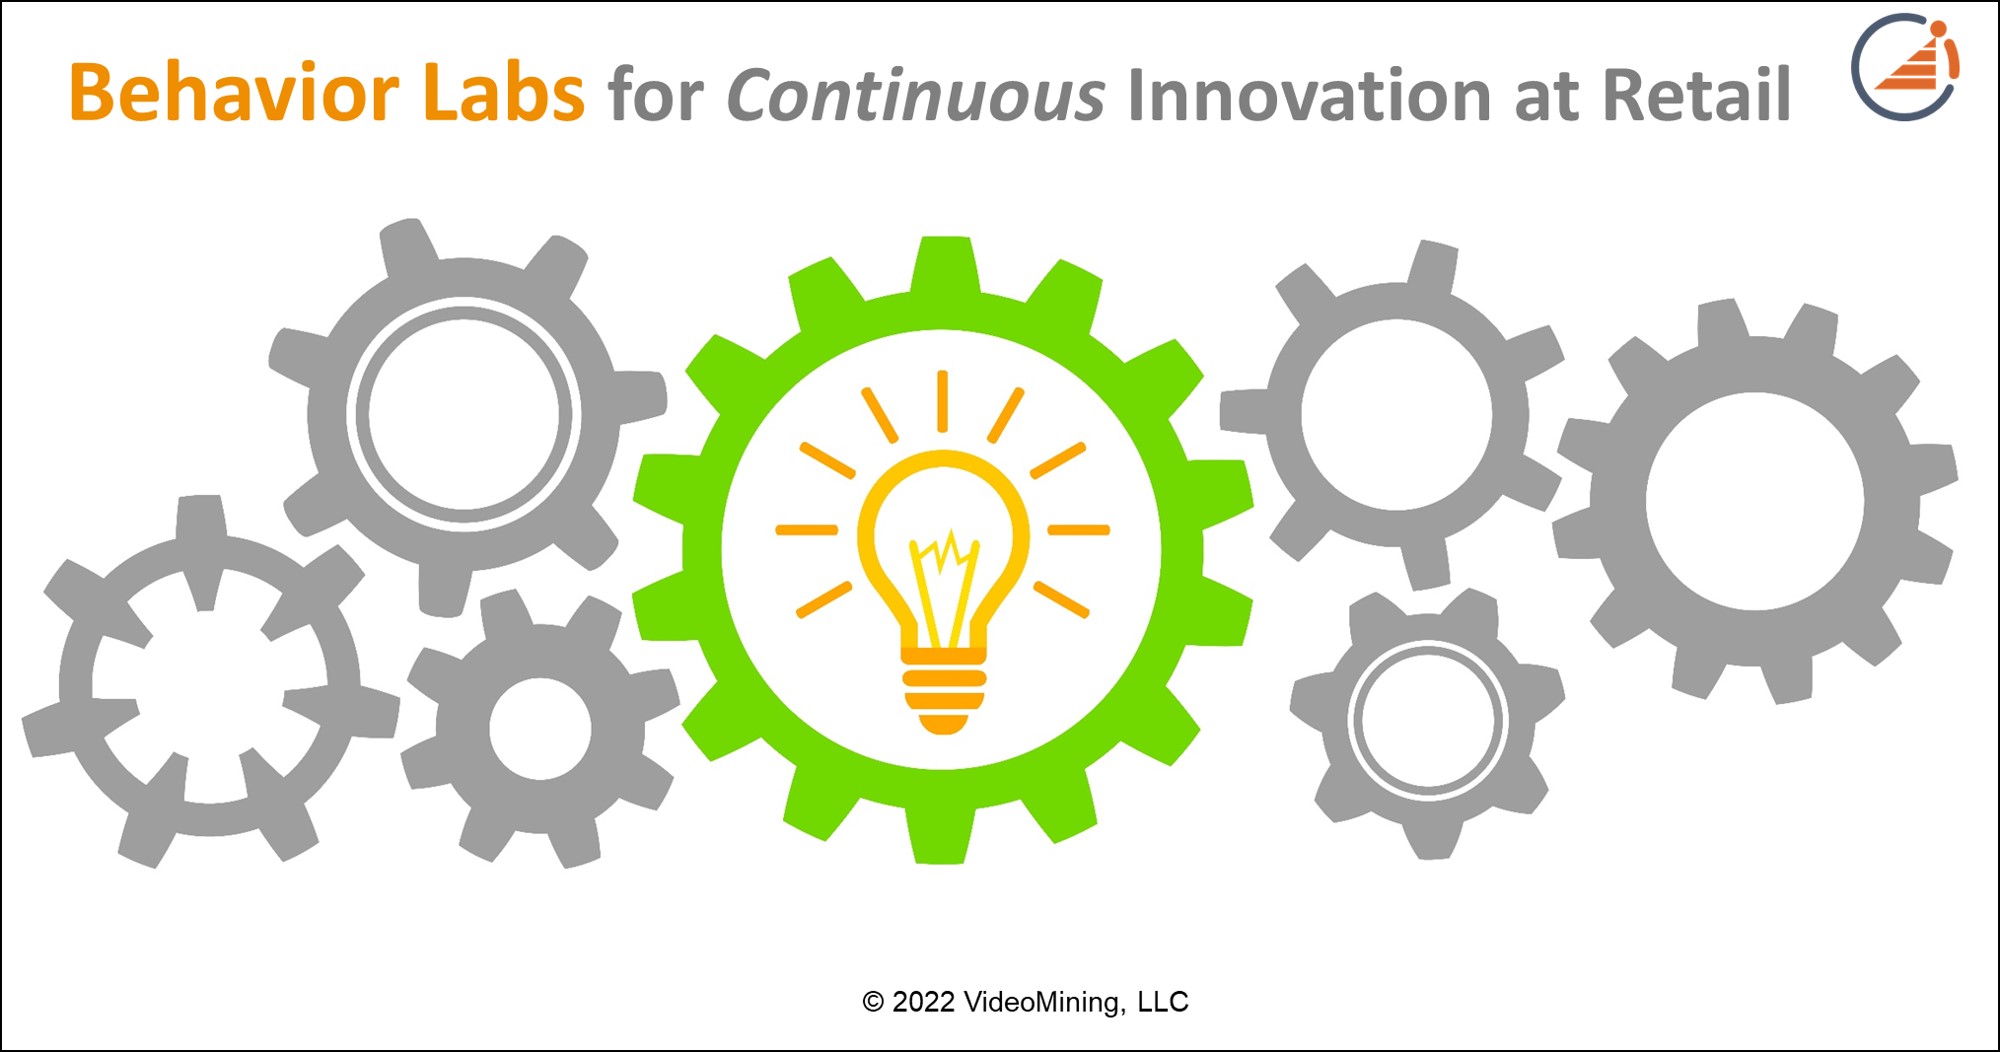 Behavior Labs for Continuous Innovation at Retail